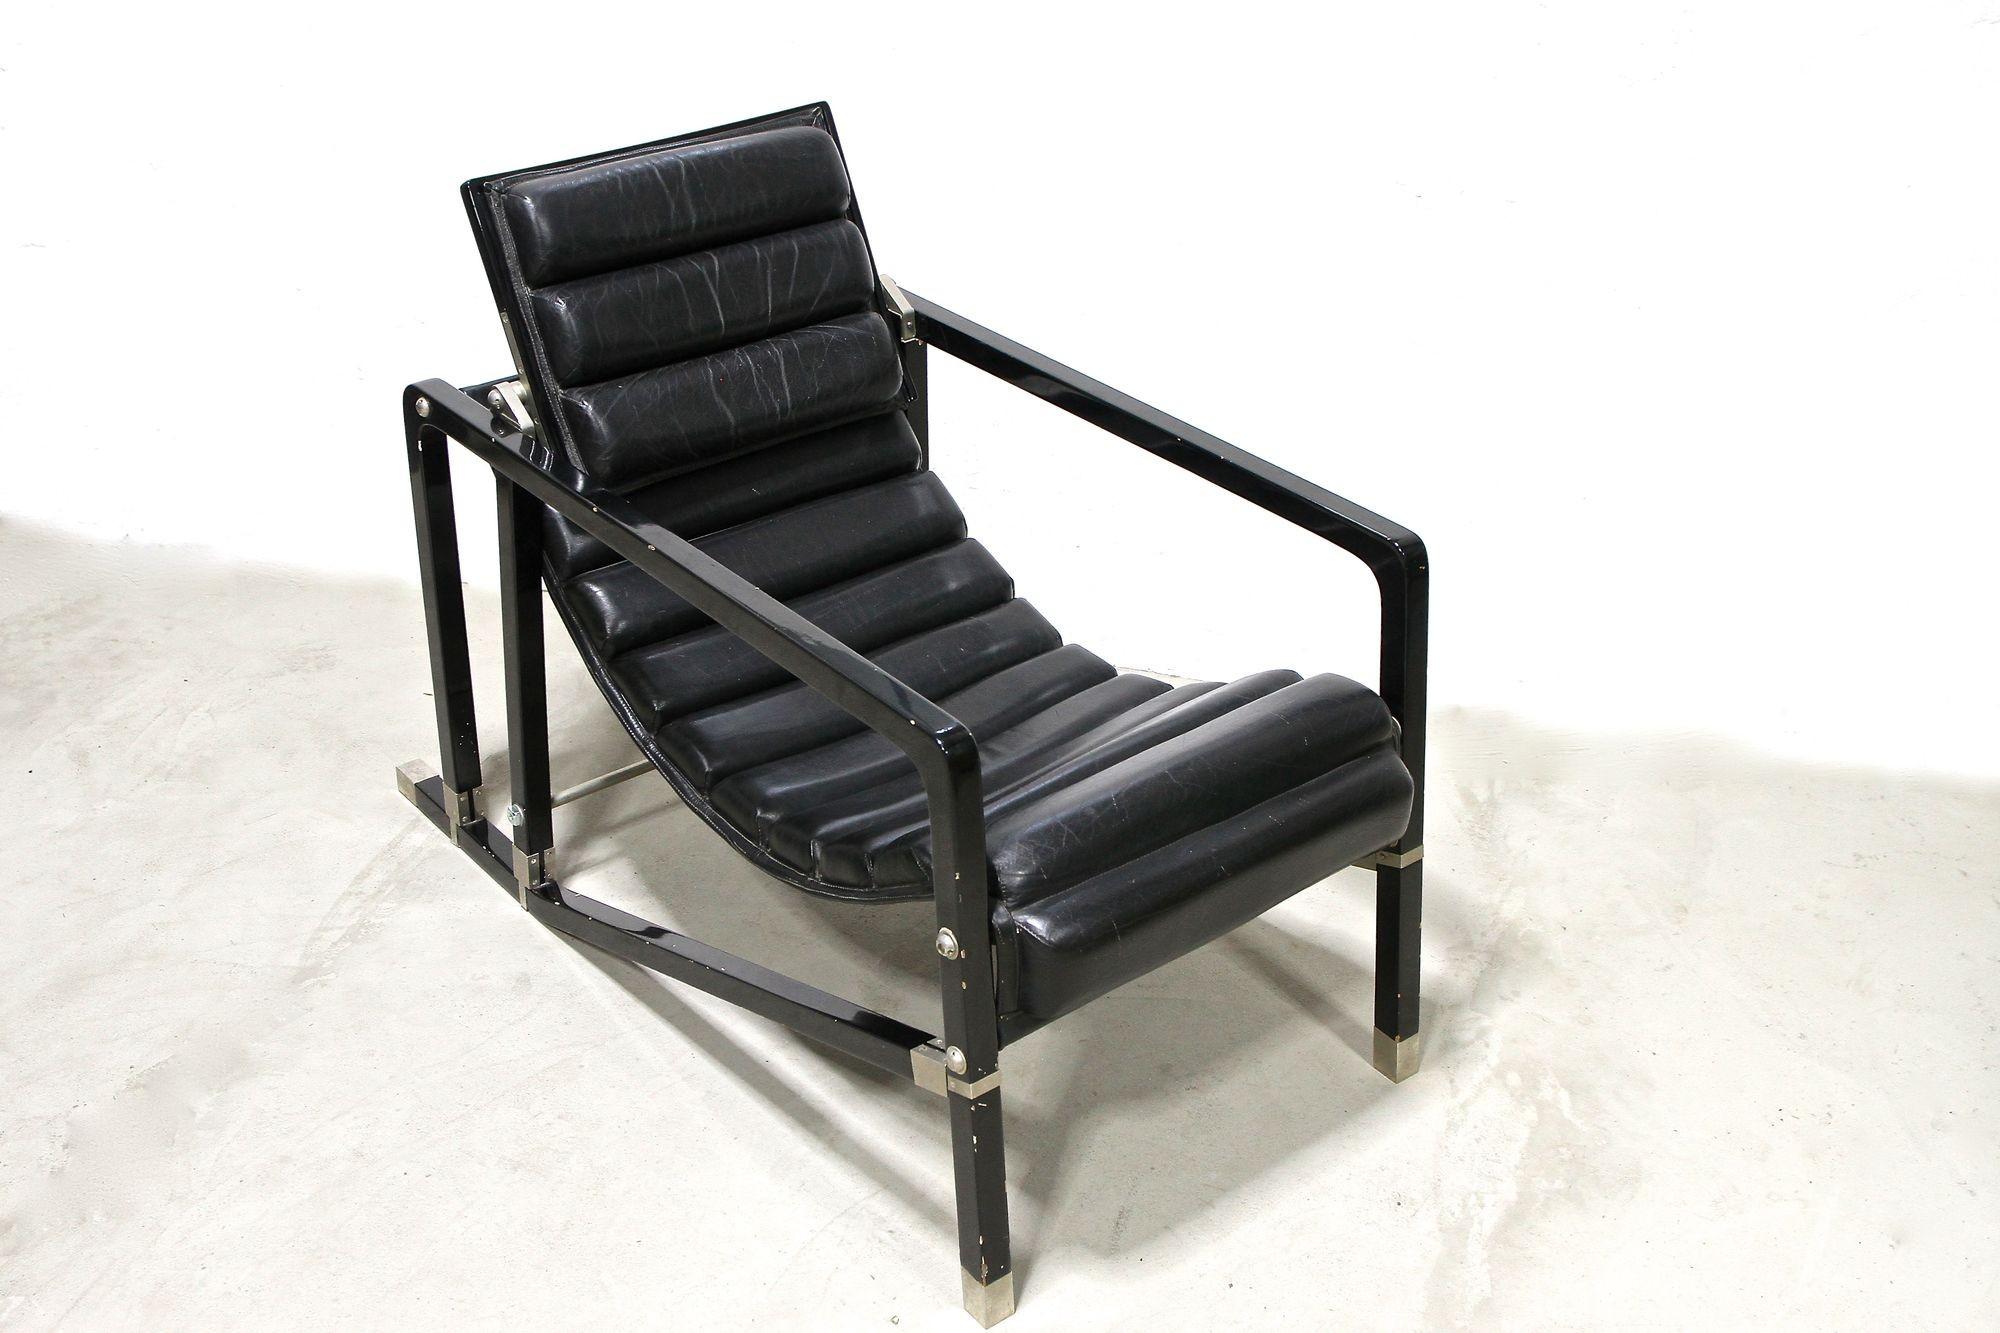 Transat Chair With Black Leather, Design Eileen Gray 1927, France ca. 1975 For Sale 11